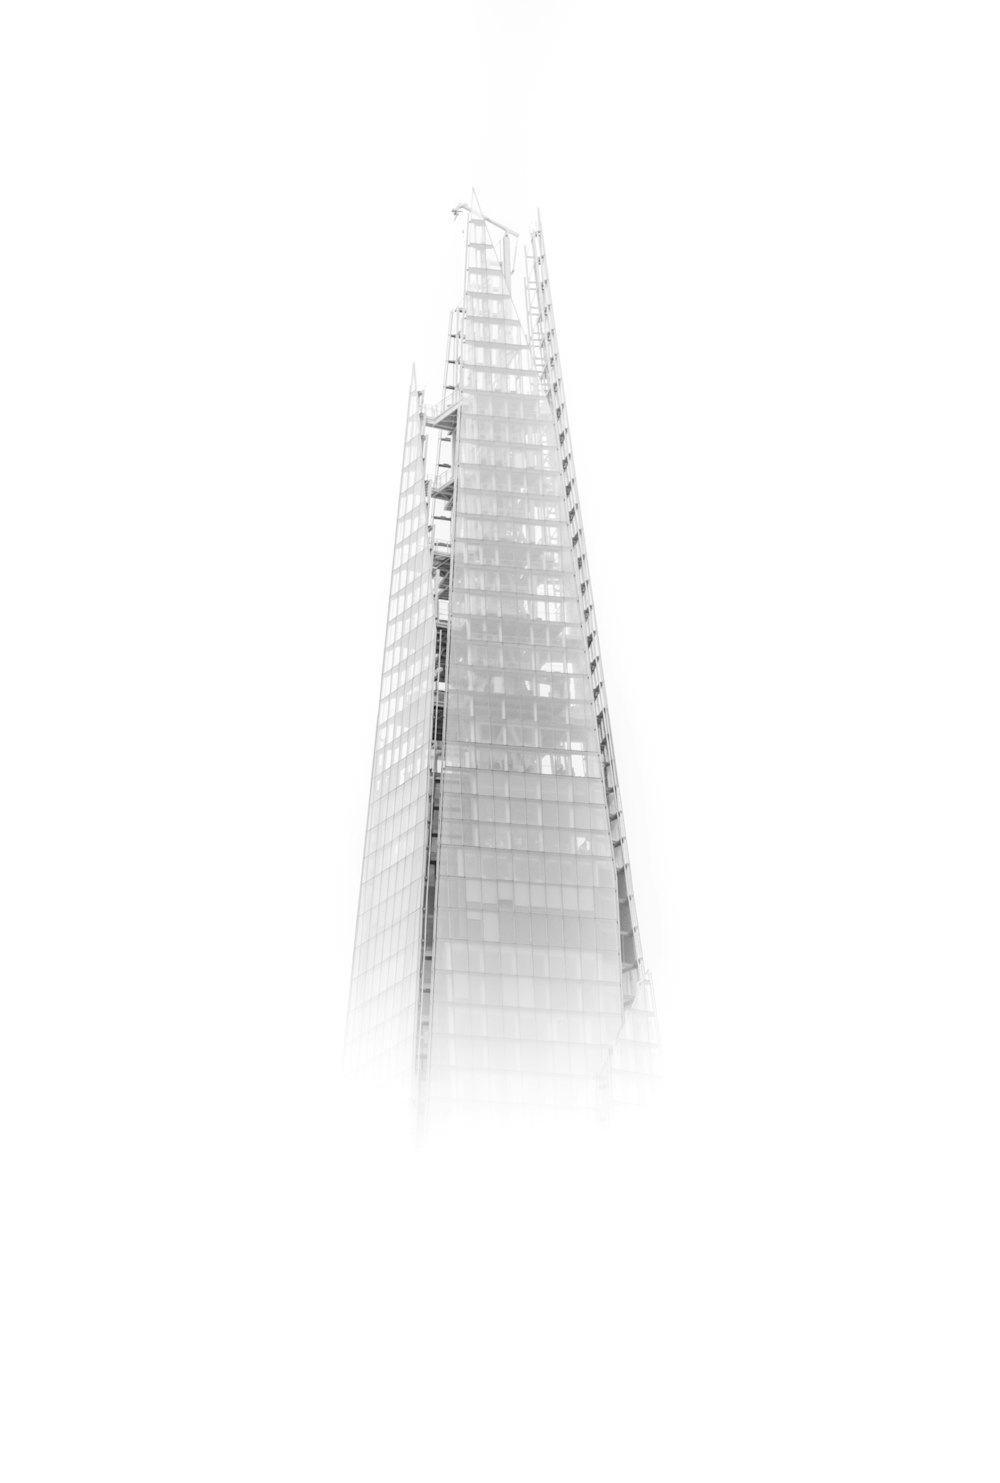 high-rise building with fogs